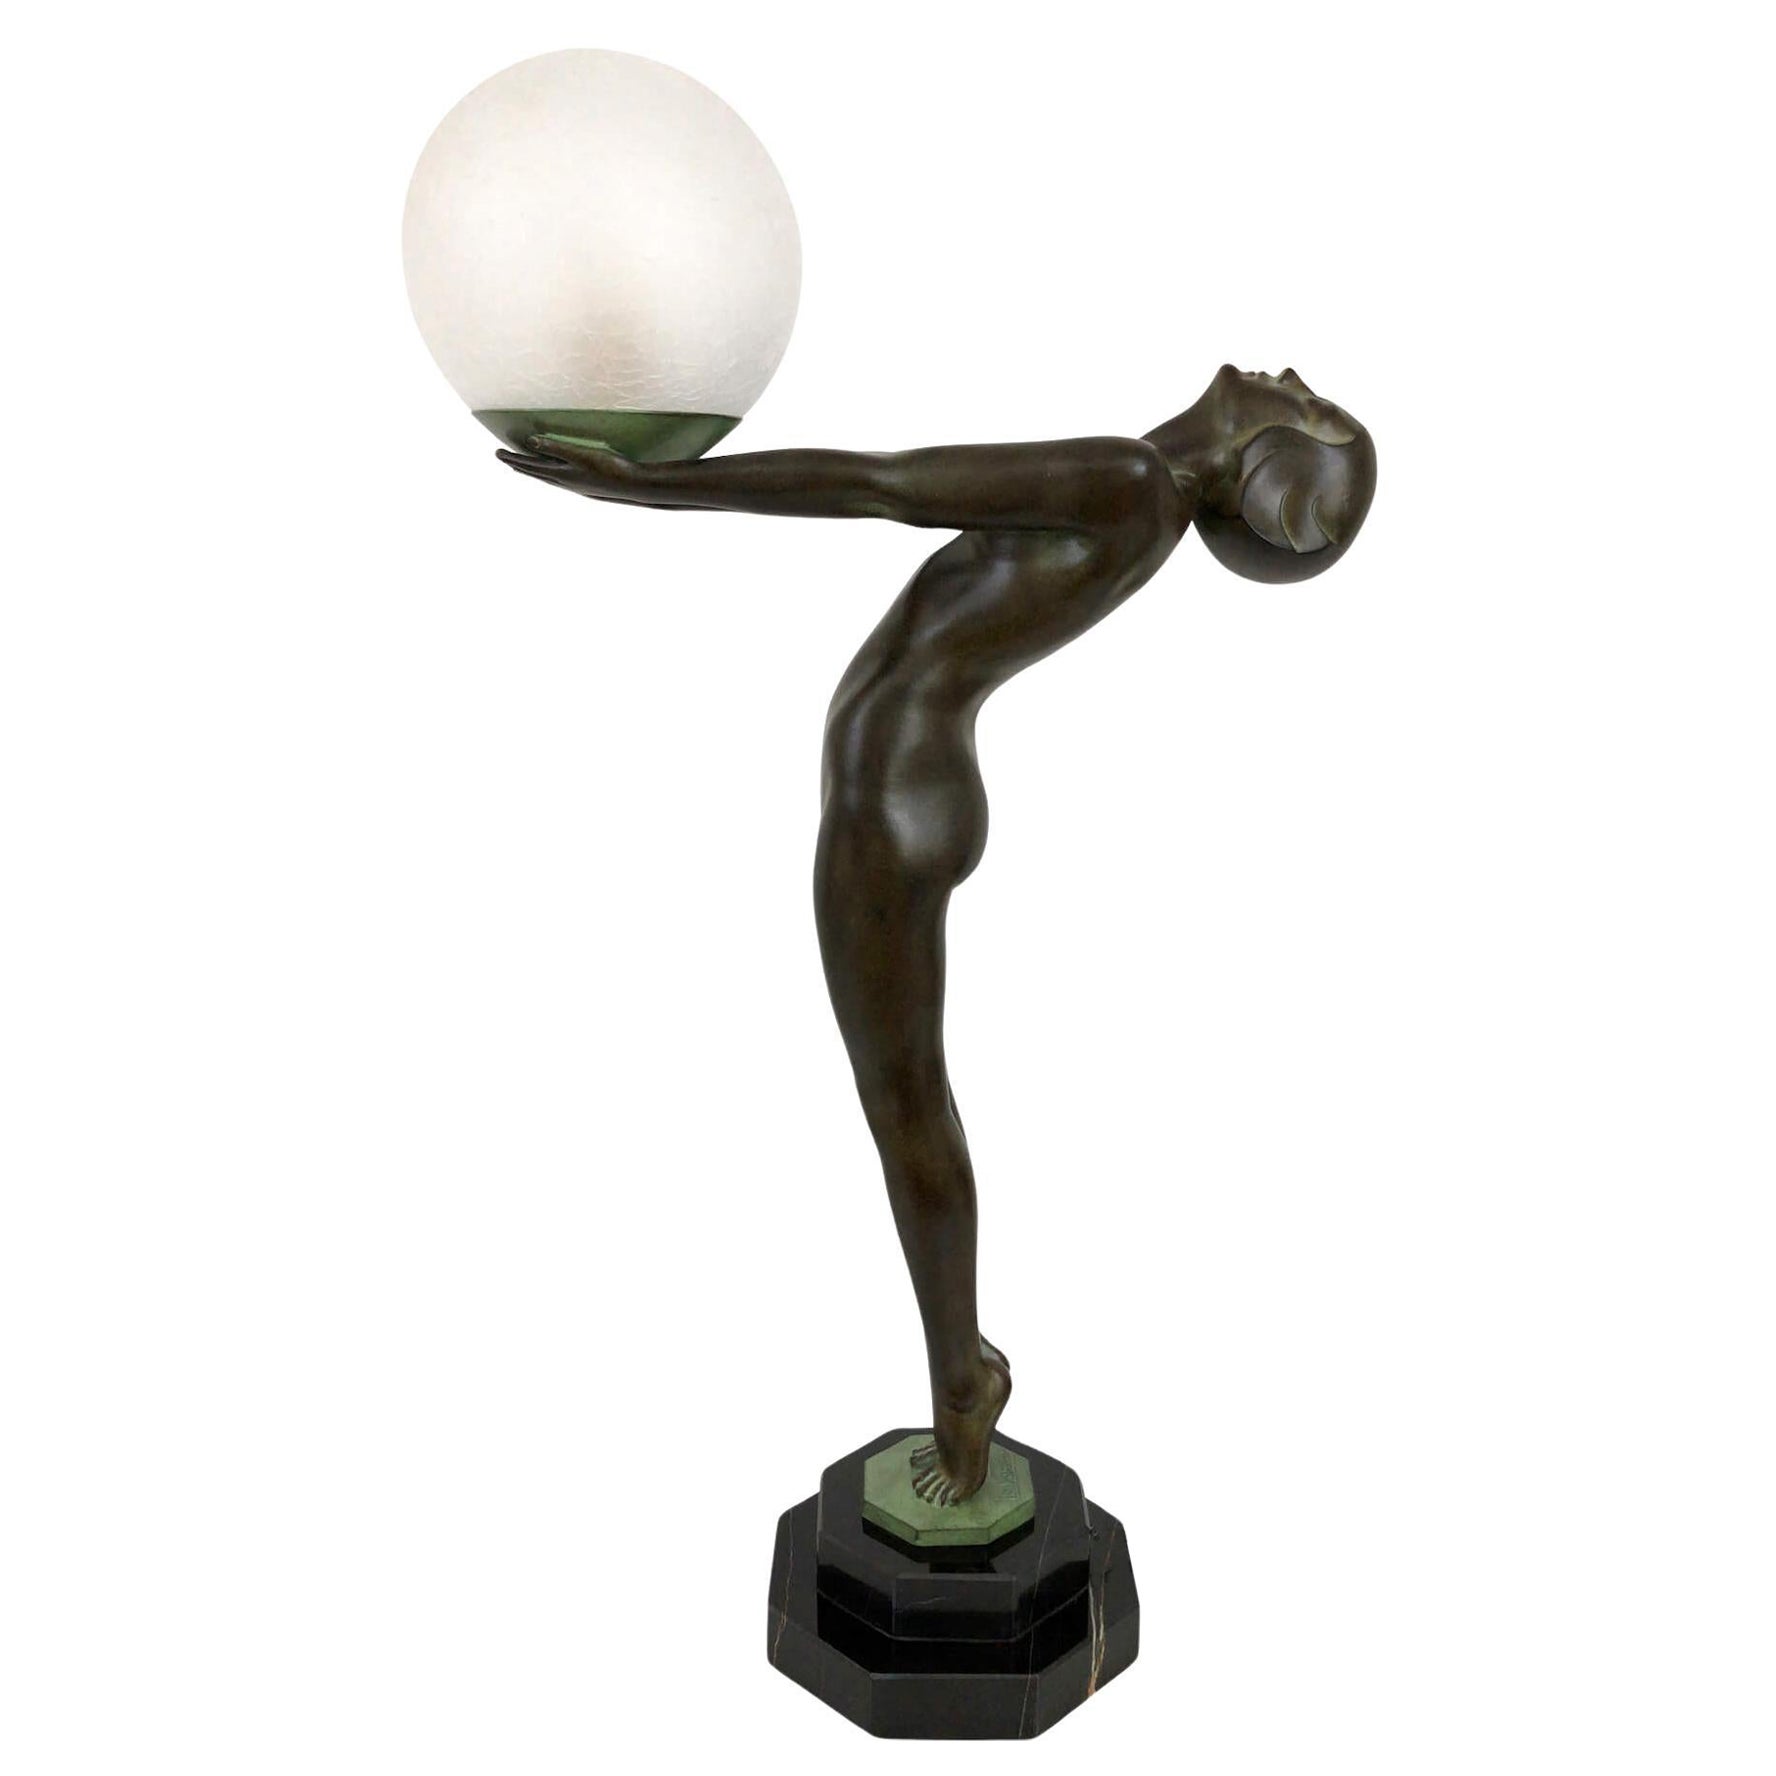 Art Deco Lumina Sculpture Clarté Lamp Nude Dancer with a Ball by Max Le Verrier For Sale